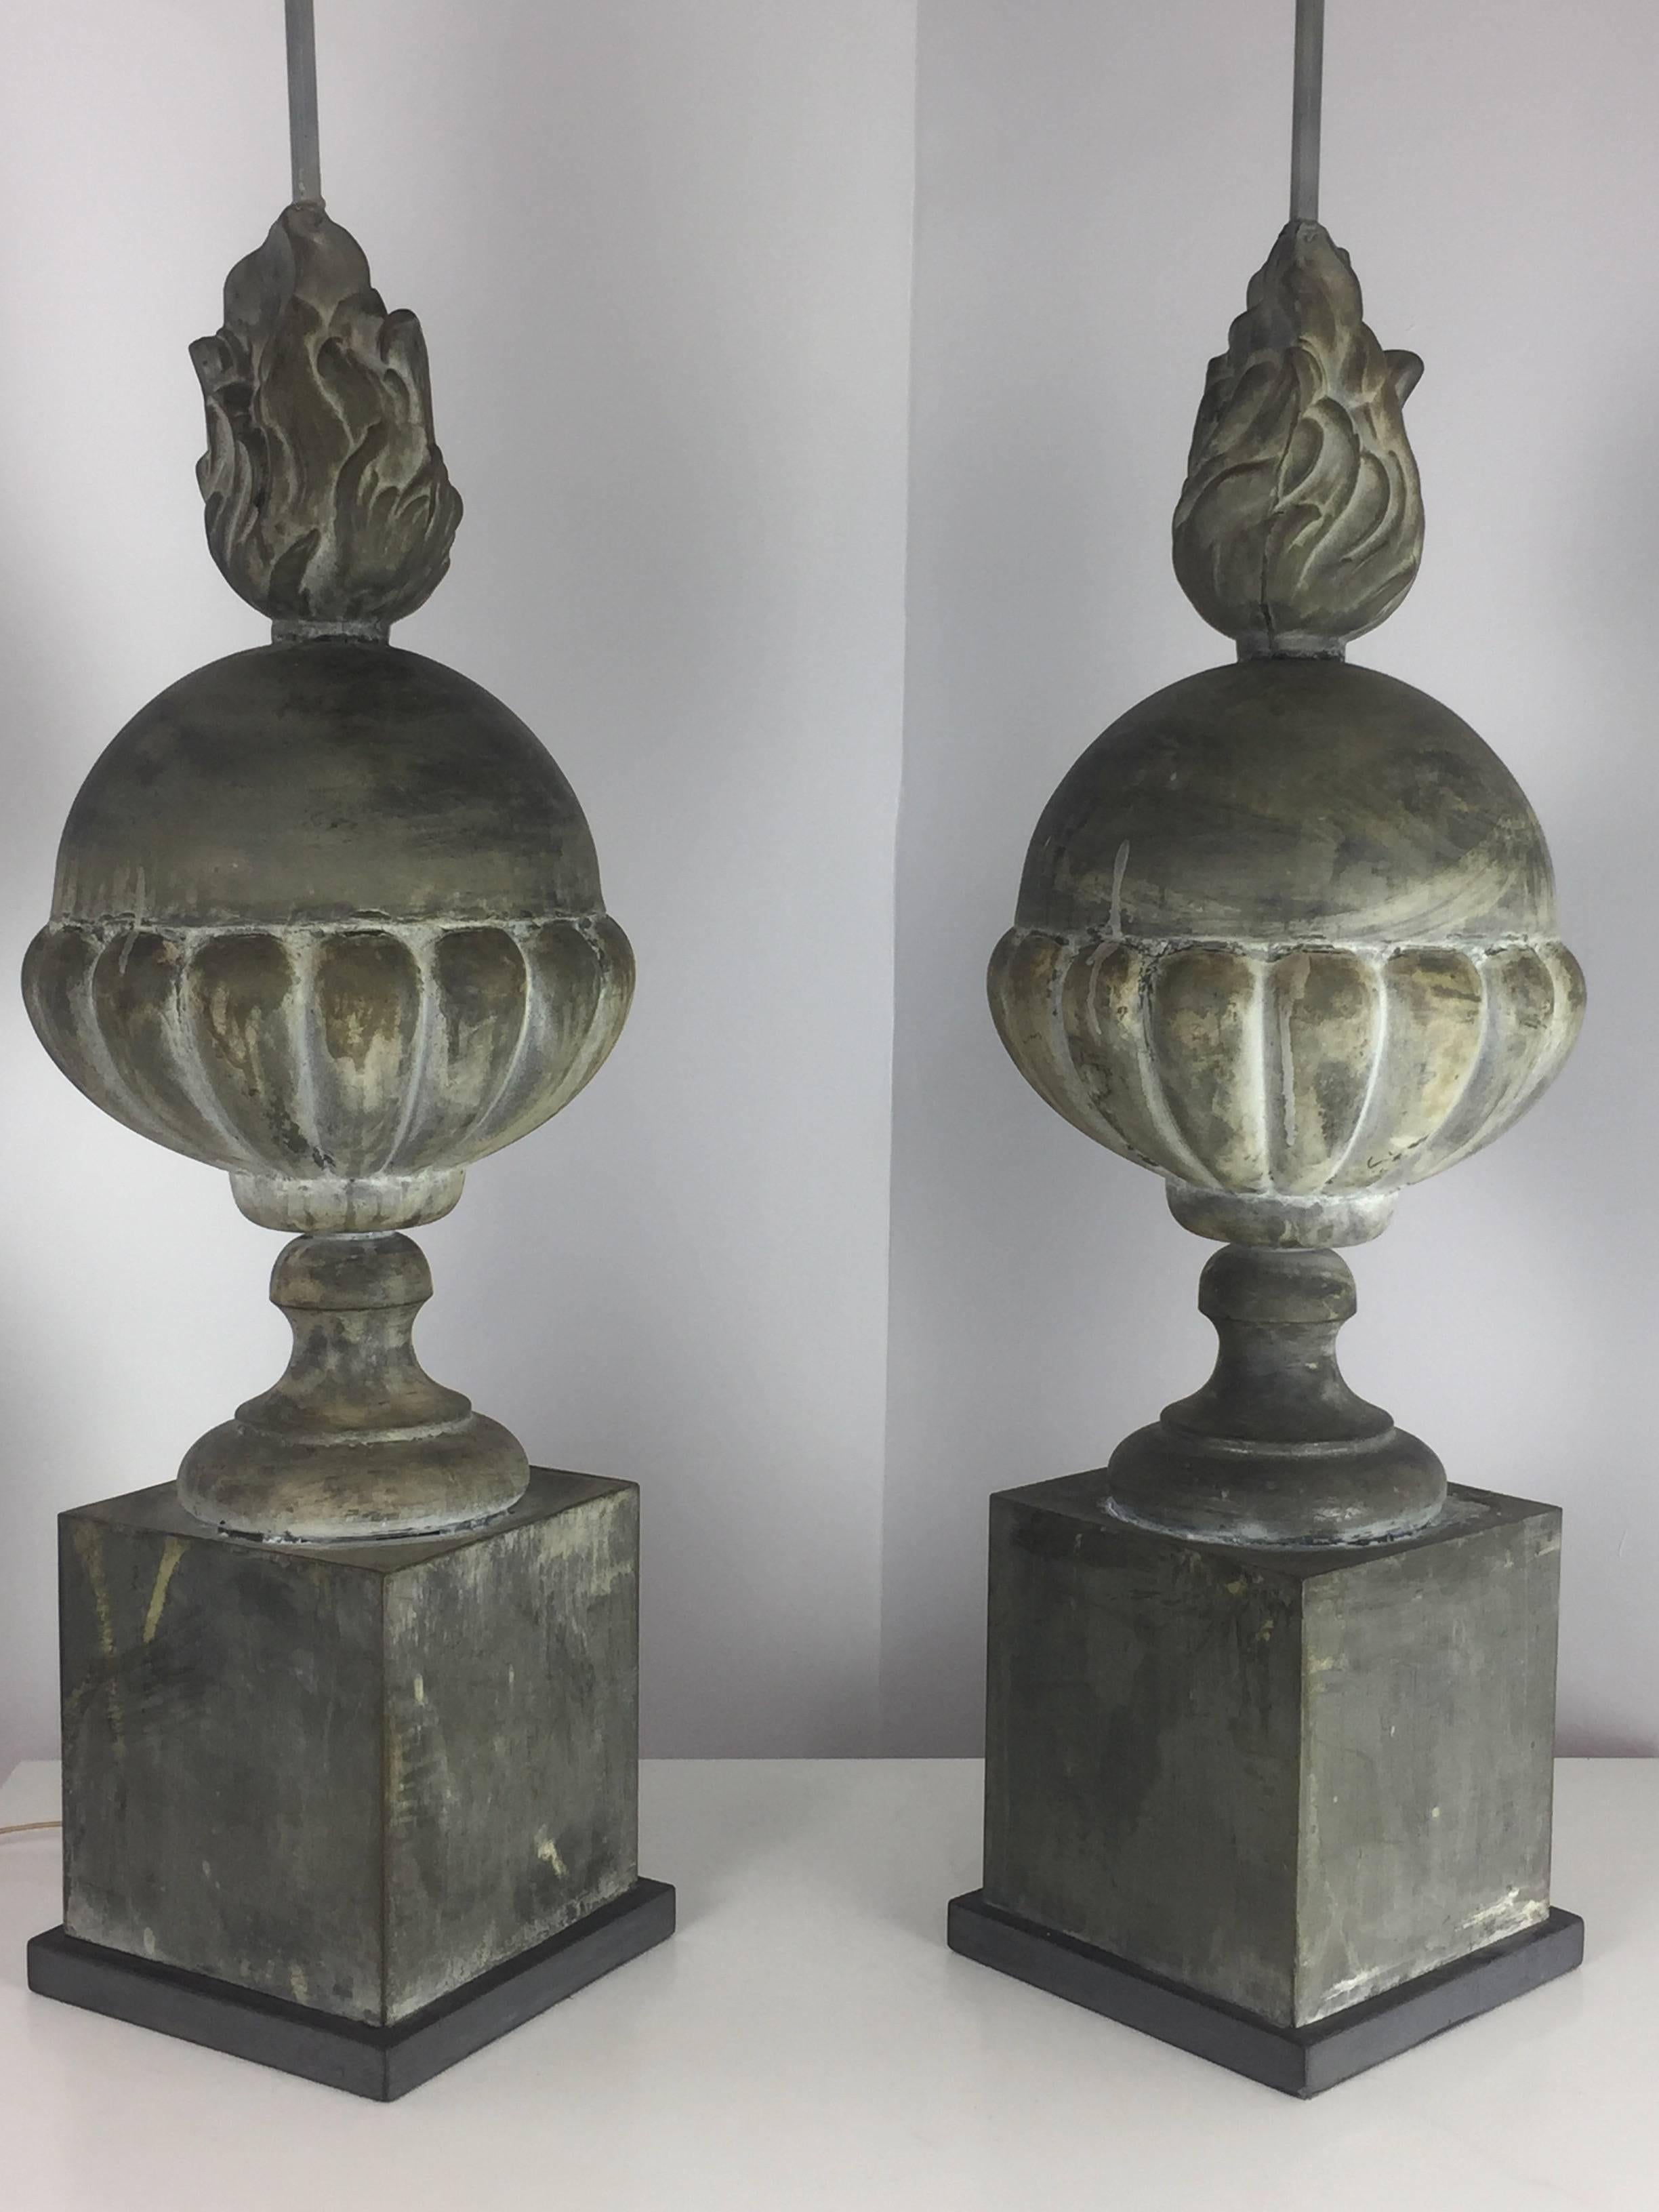 Beautifully patinated table lamps created in the middle of the last century. These lamps have a lovely patina with architectural elements that would add a stately feeling to any room.